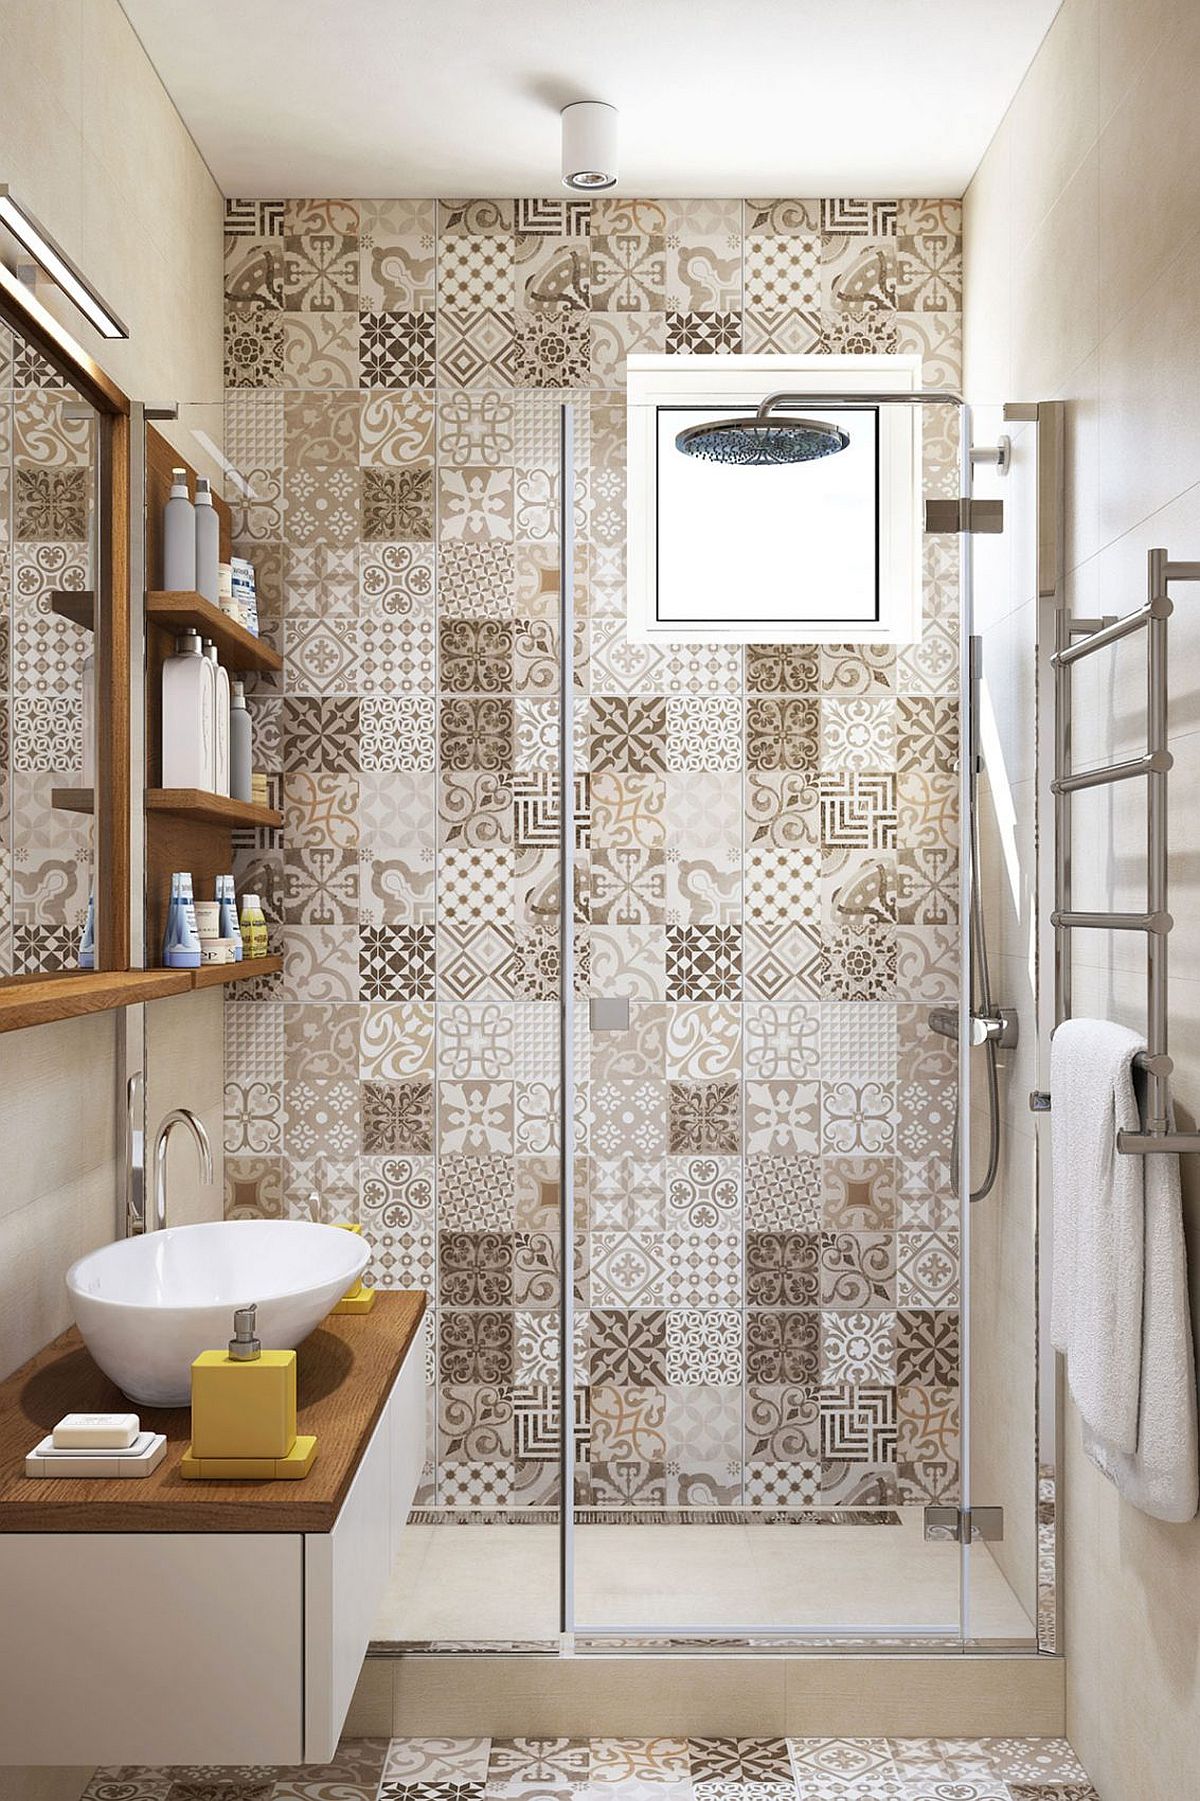 Fabulous use of tiles brings pattern to the small bathroom